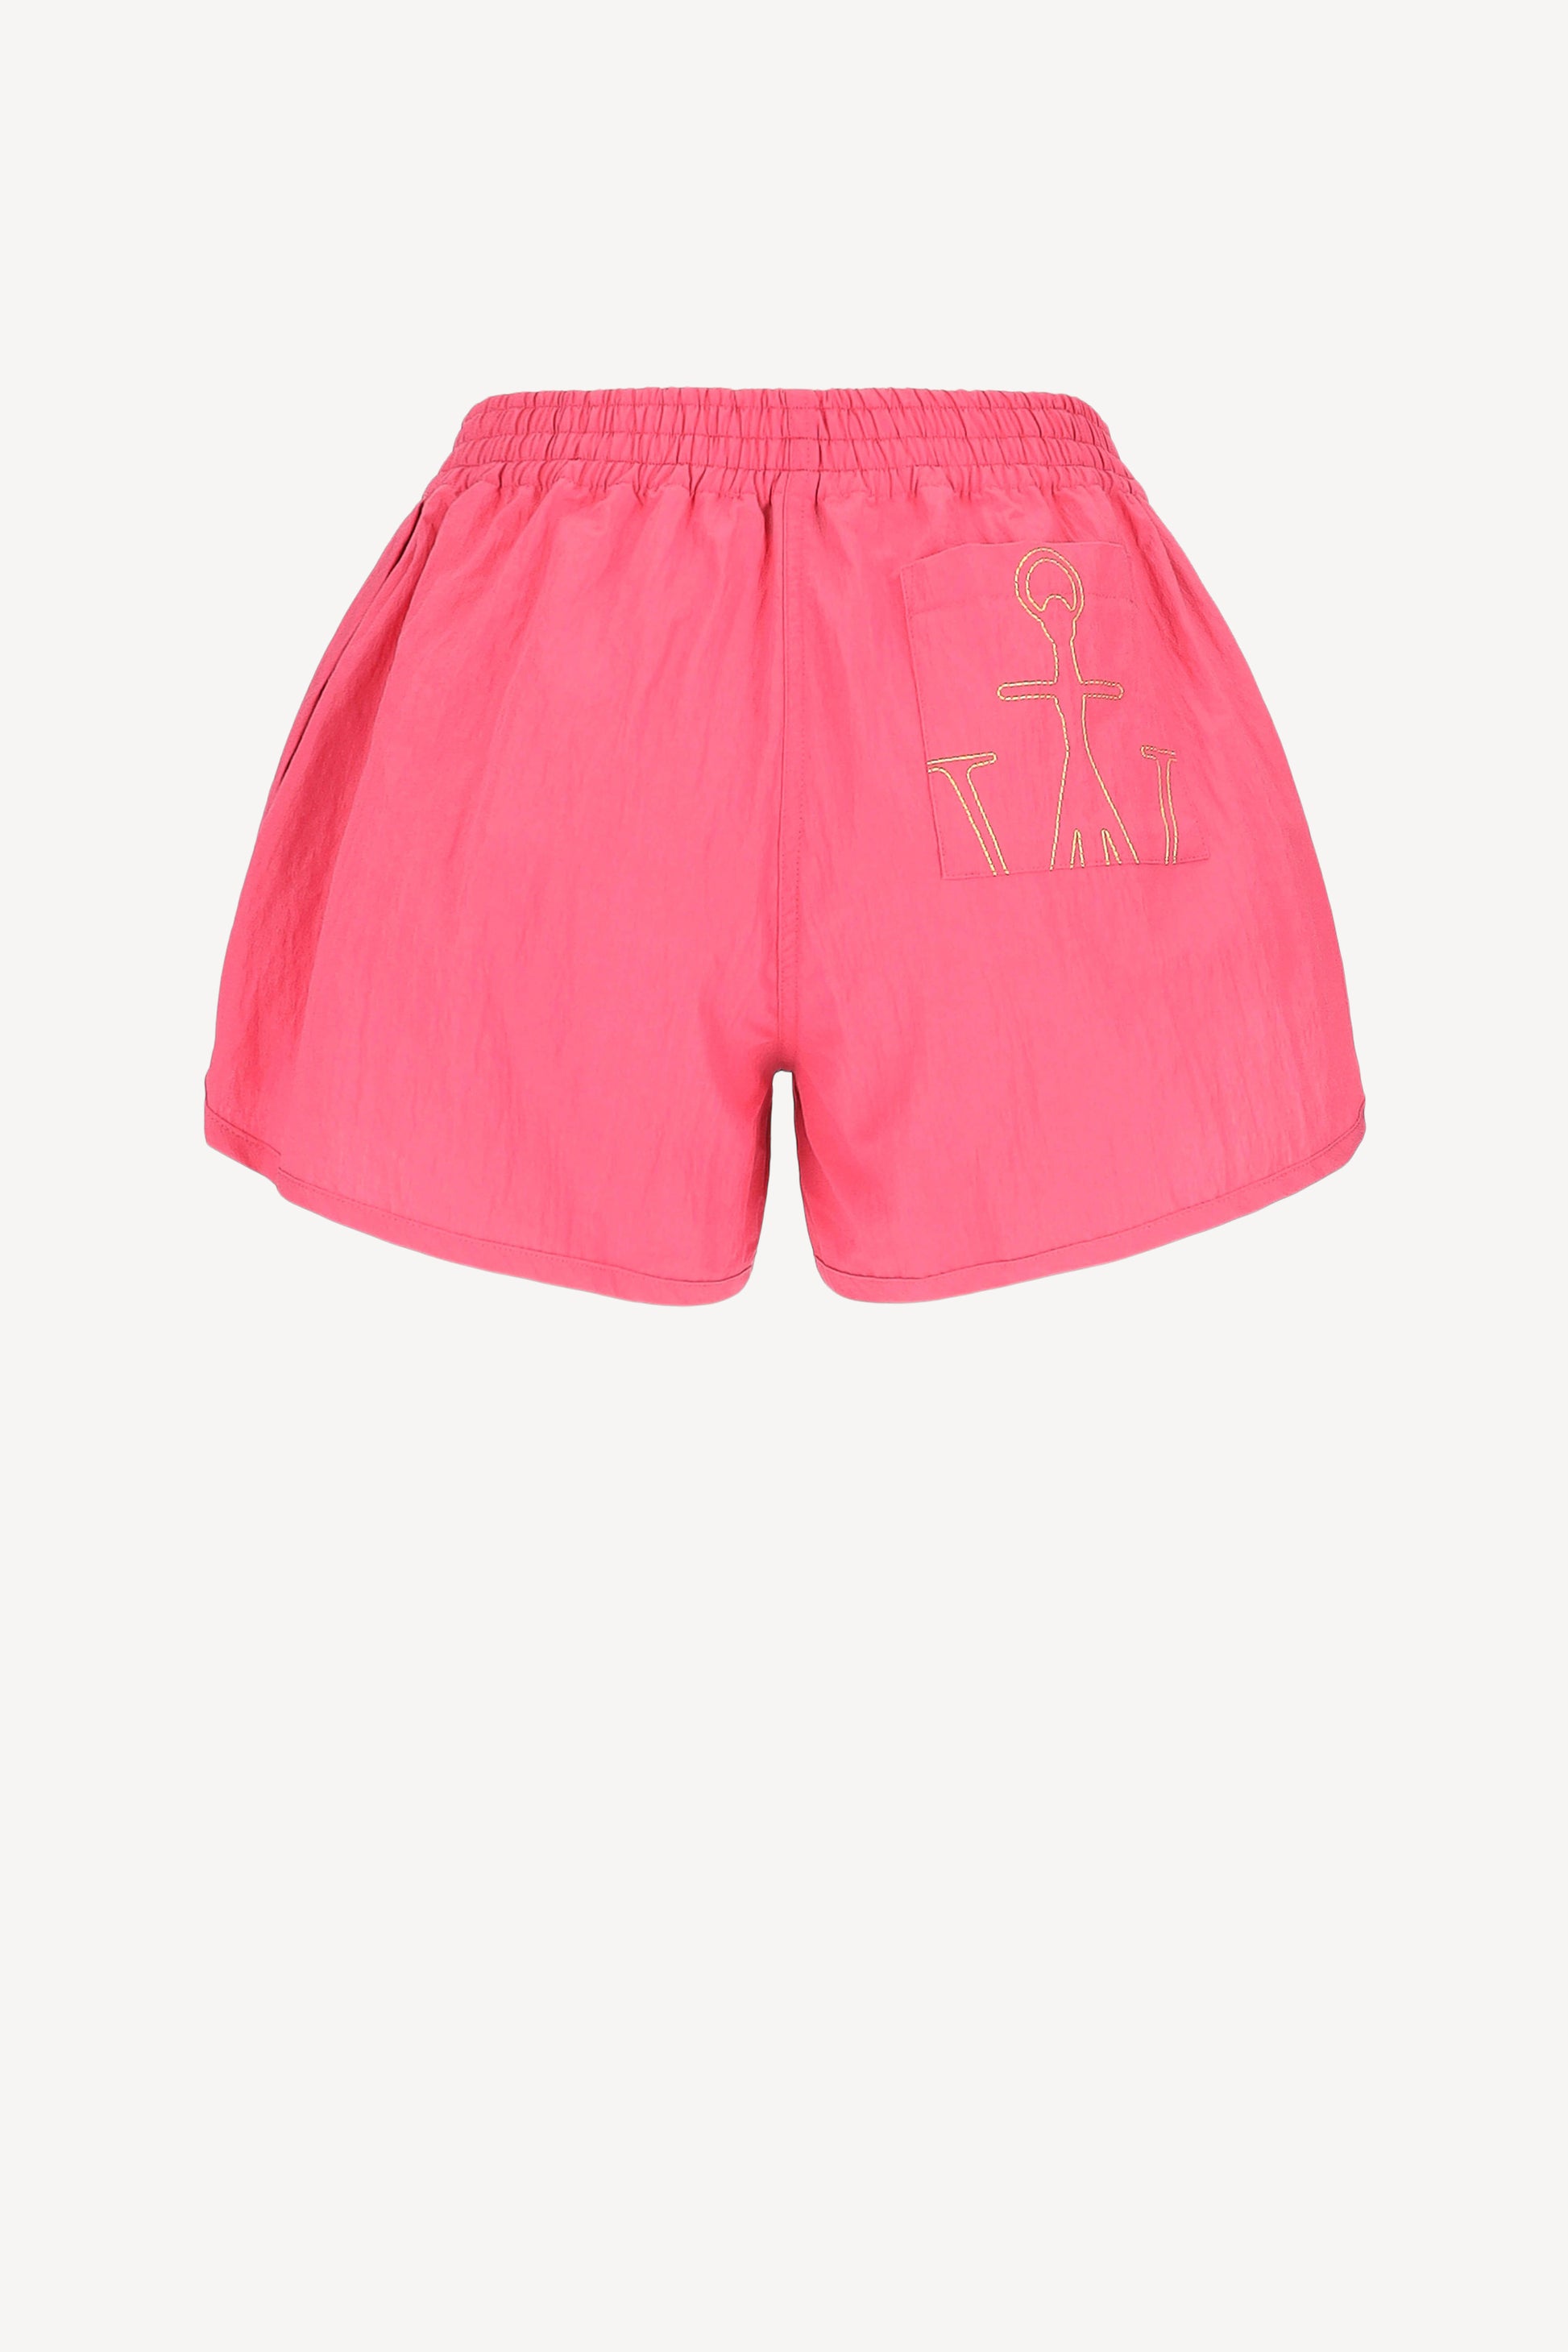 Shorts Running in PinkJW Anderson - Anita Hass